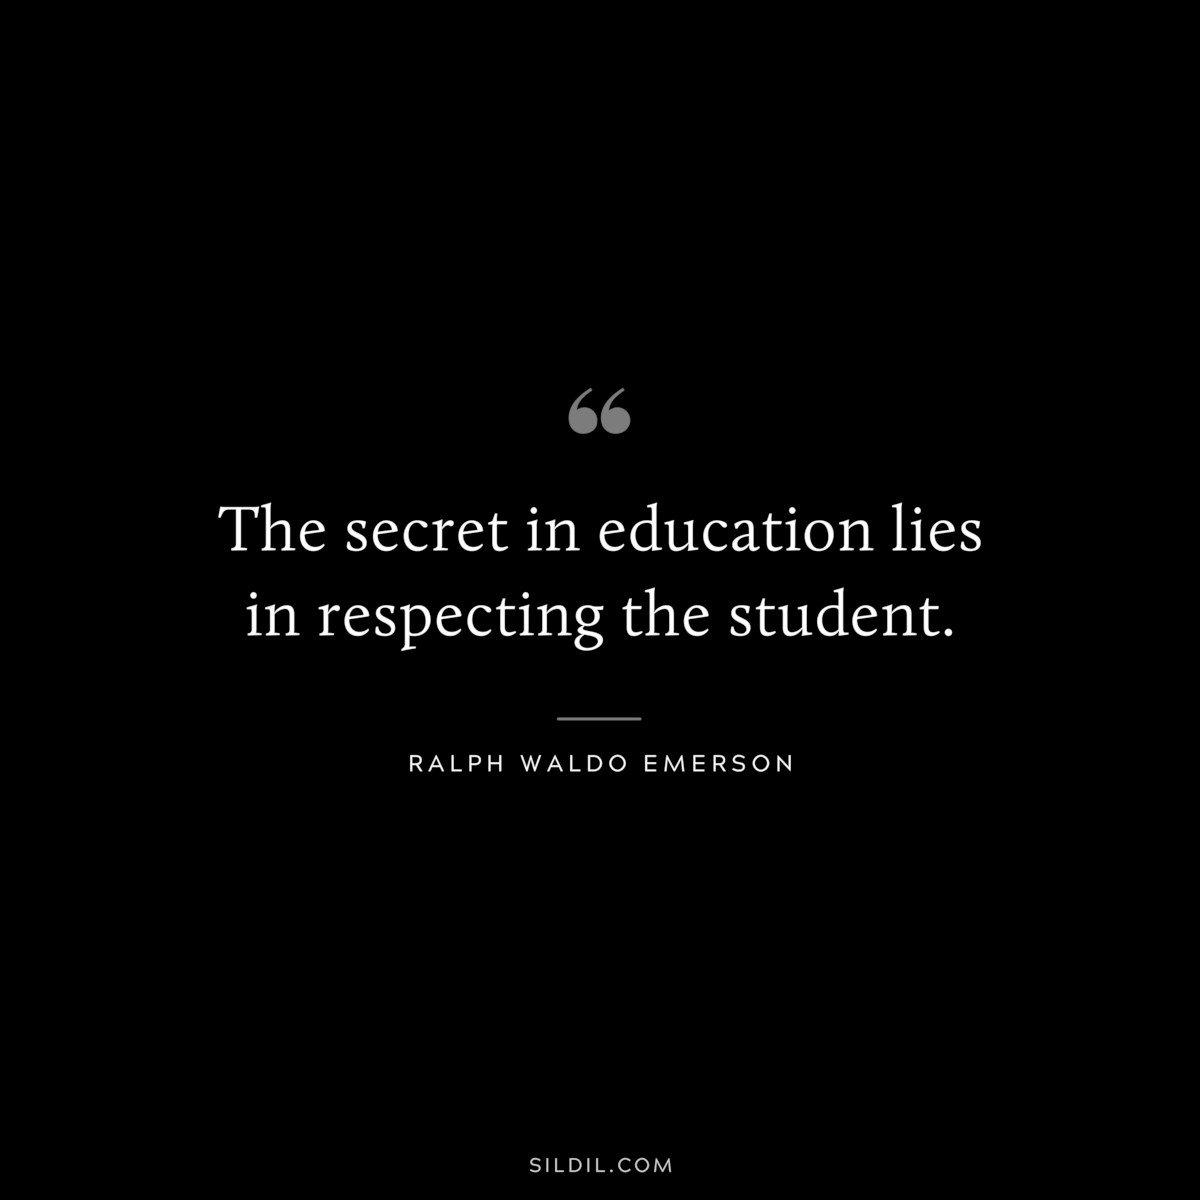 The secret in education lies in respecting the student. — Ralph Waldo Emerson